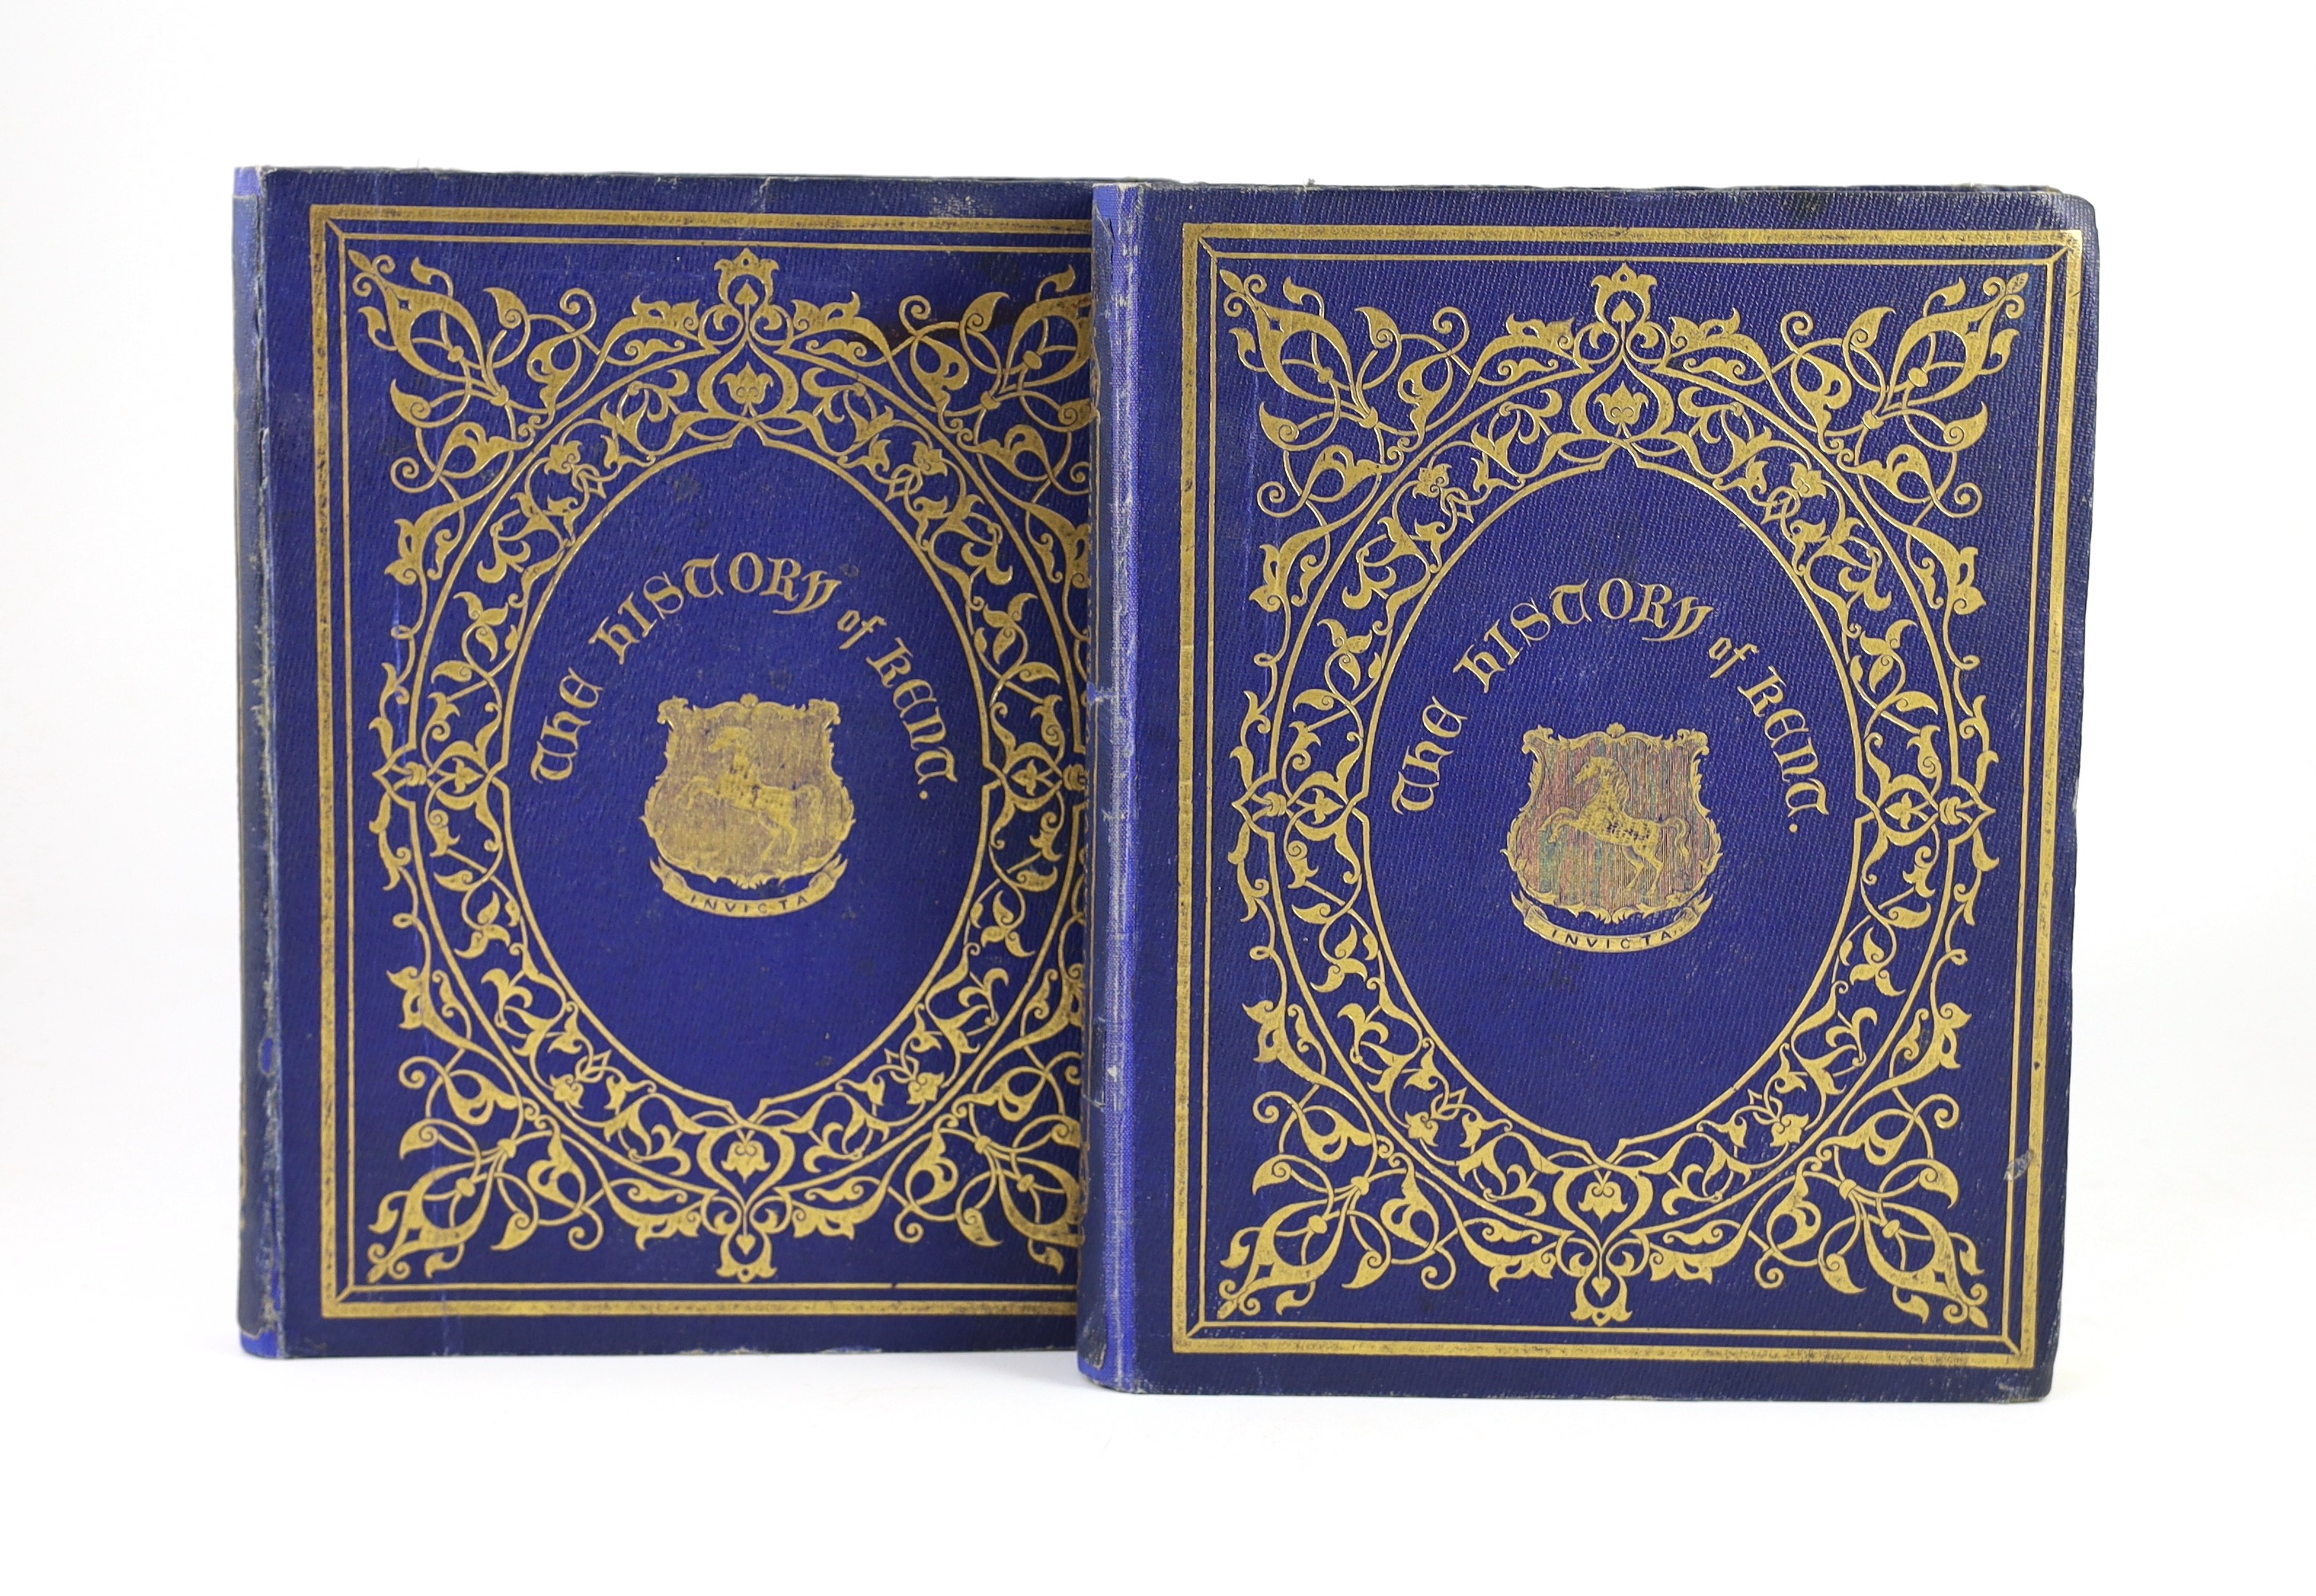 Dunkin, Alfred John - History of the County of Kent, 2 vols, with authors presentation inscription, 4to, blue cloth gilt blind embossed, John Russell Smith, London, 1856-58 [only 70 copies printed of vol. 1 and 200 of vo